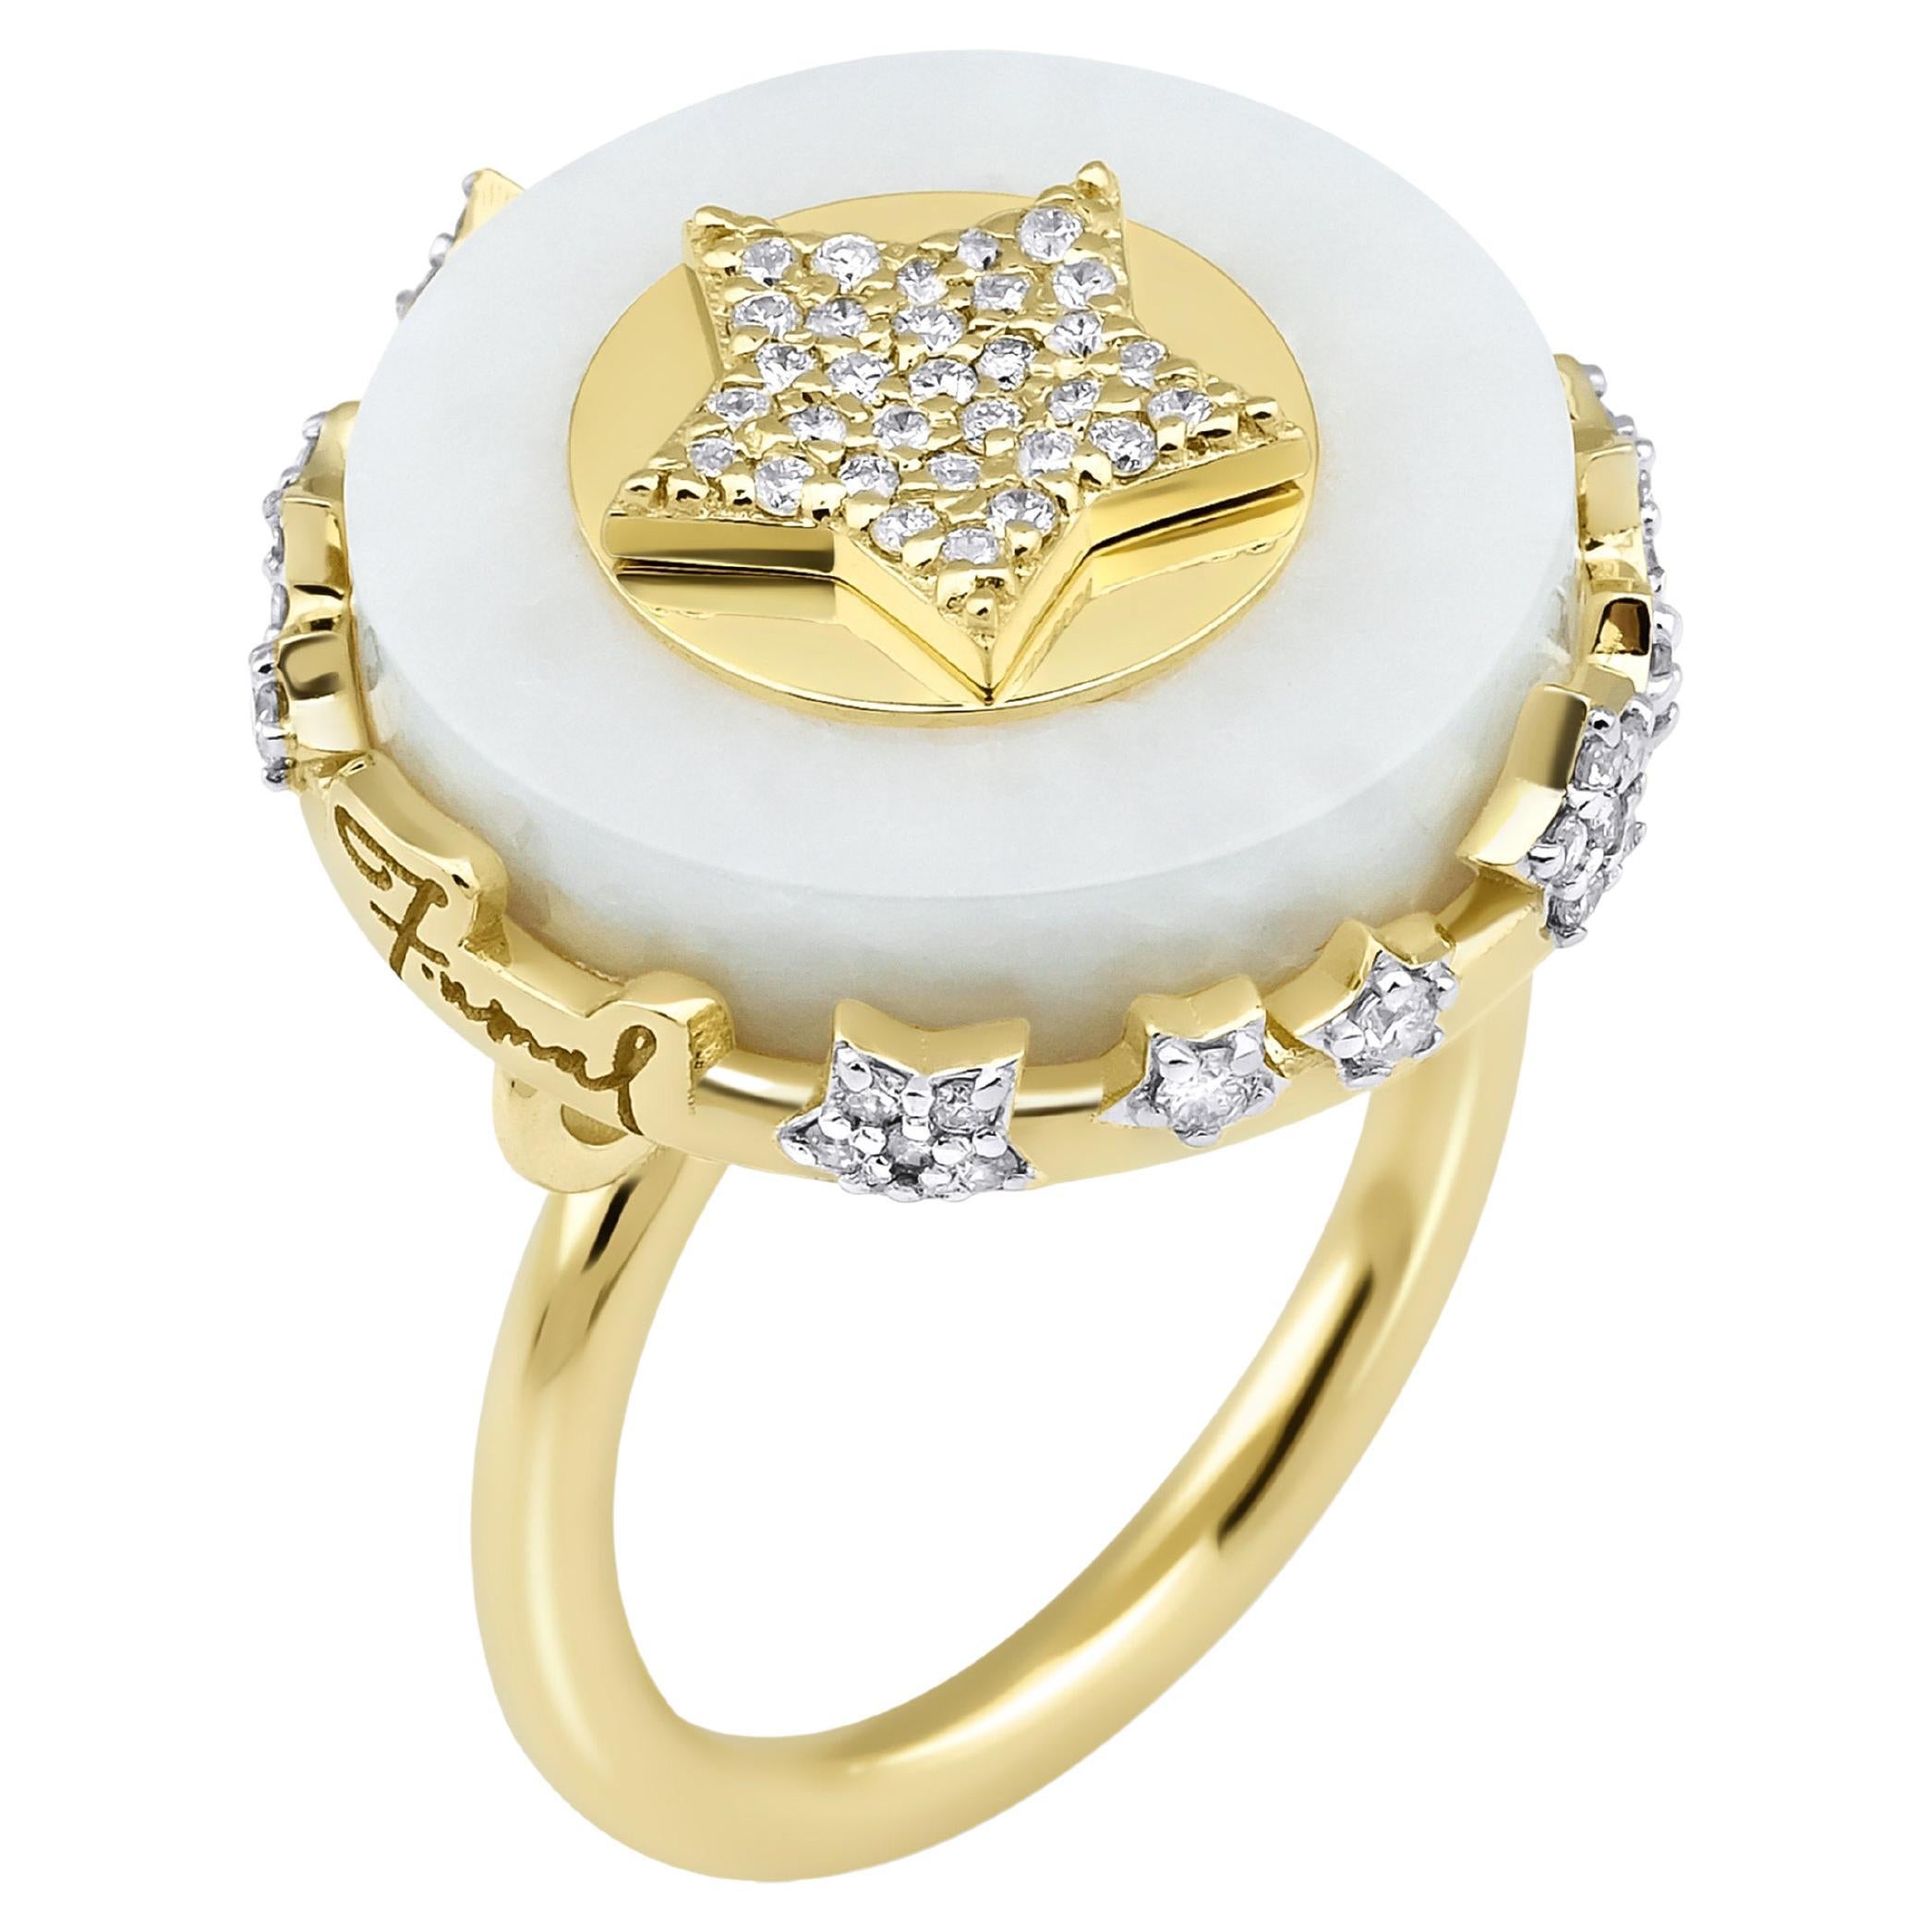 For Sale:  Star Charm White Marble Ring with 14k Yellow Gold and .69ct Natural Diamonds